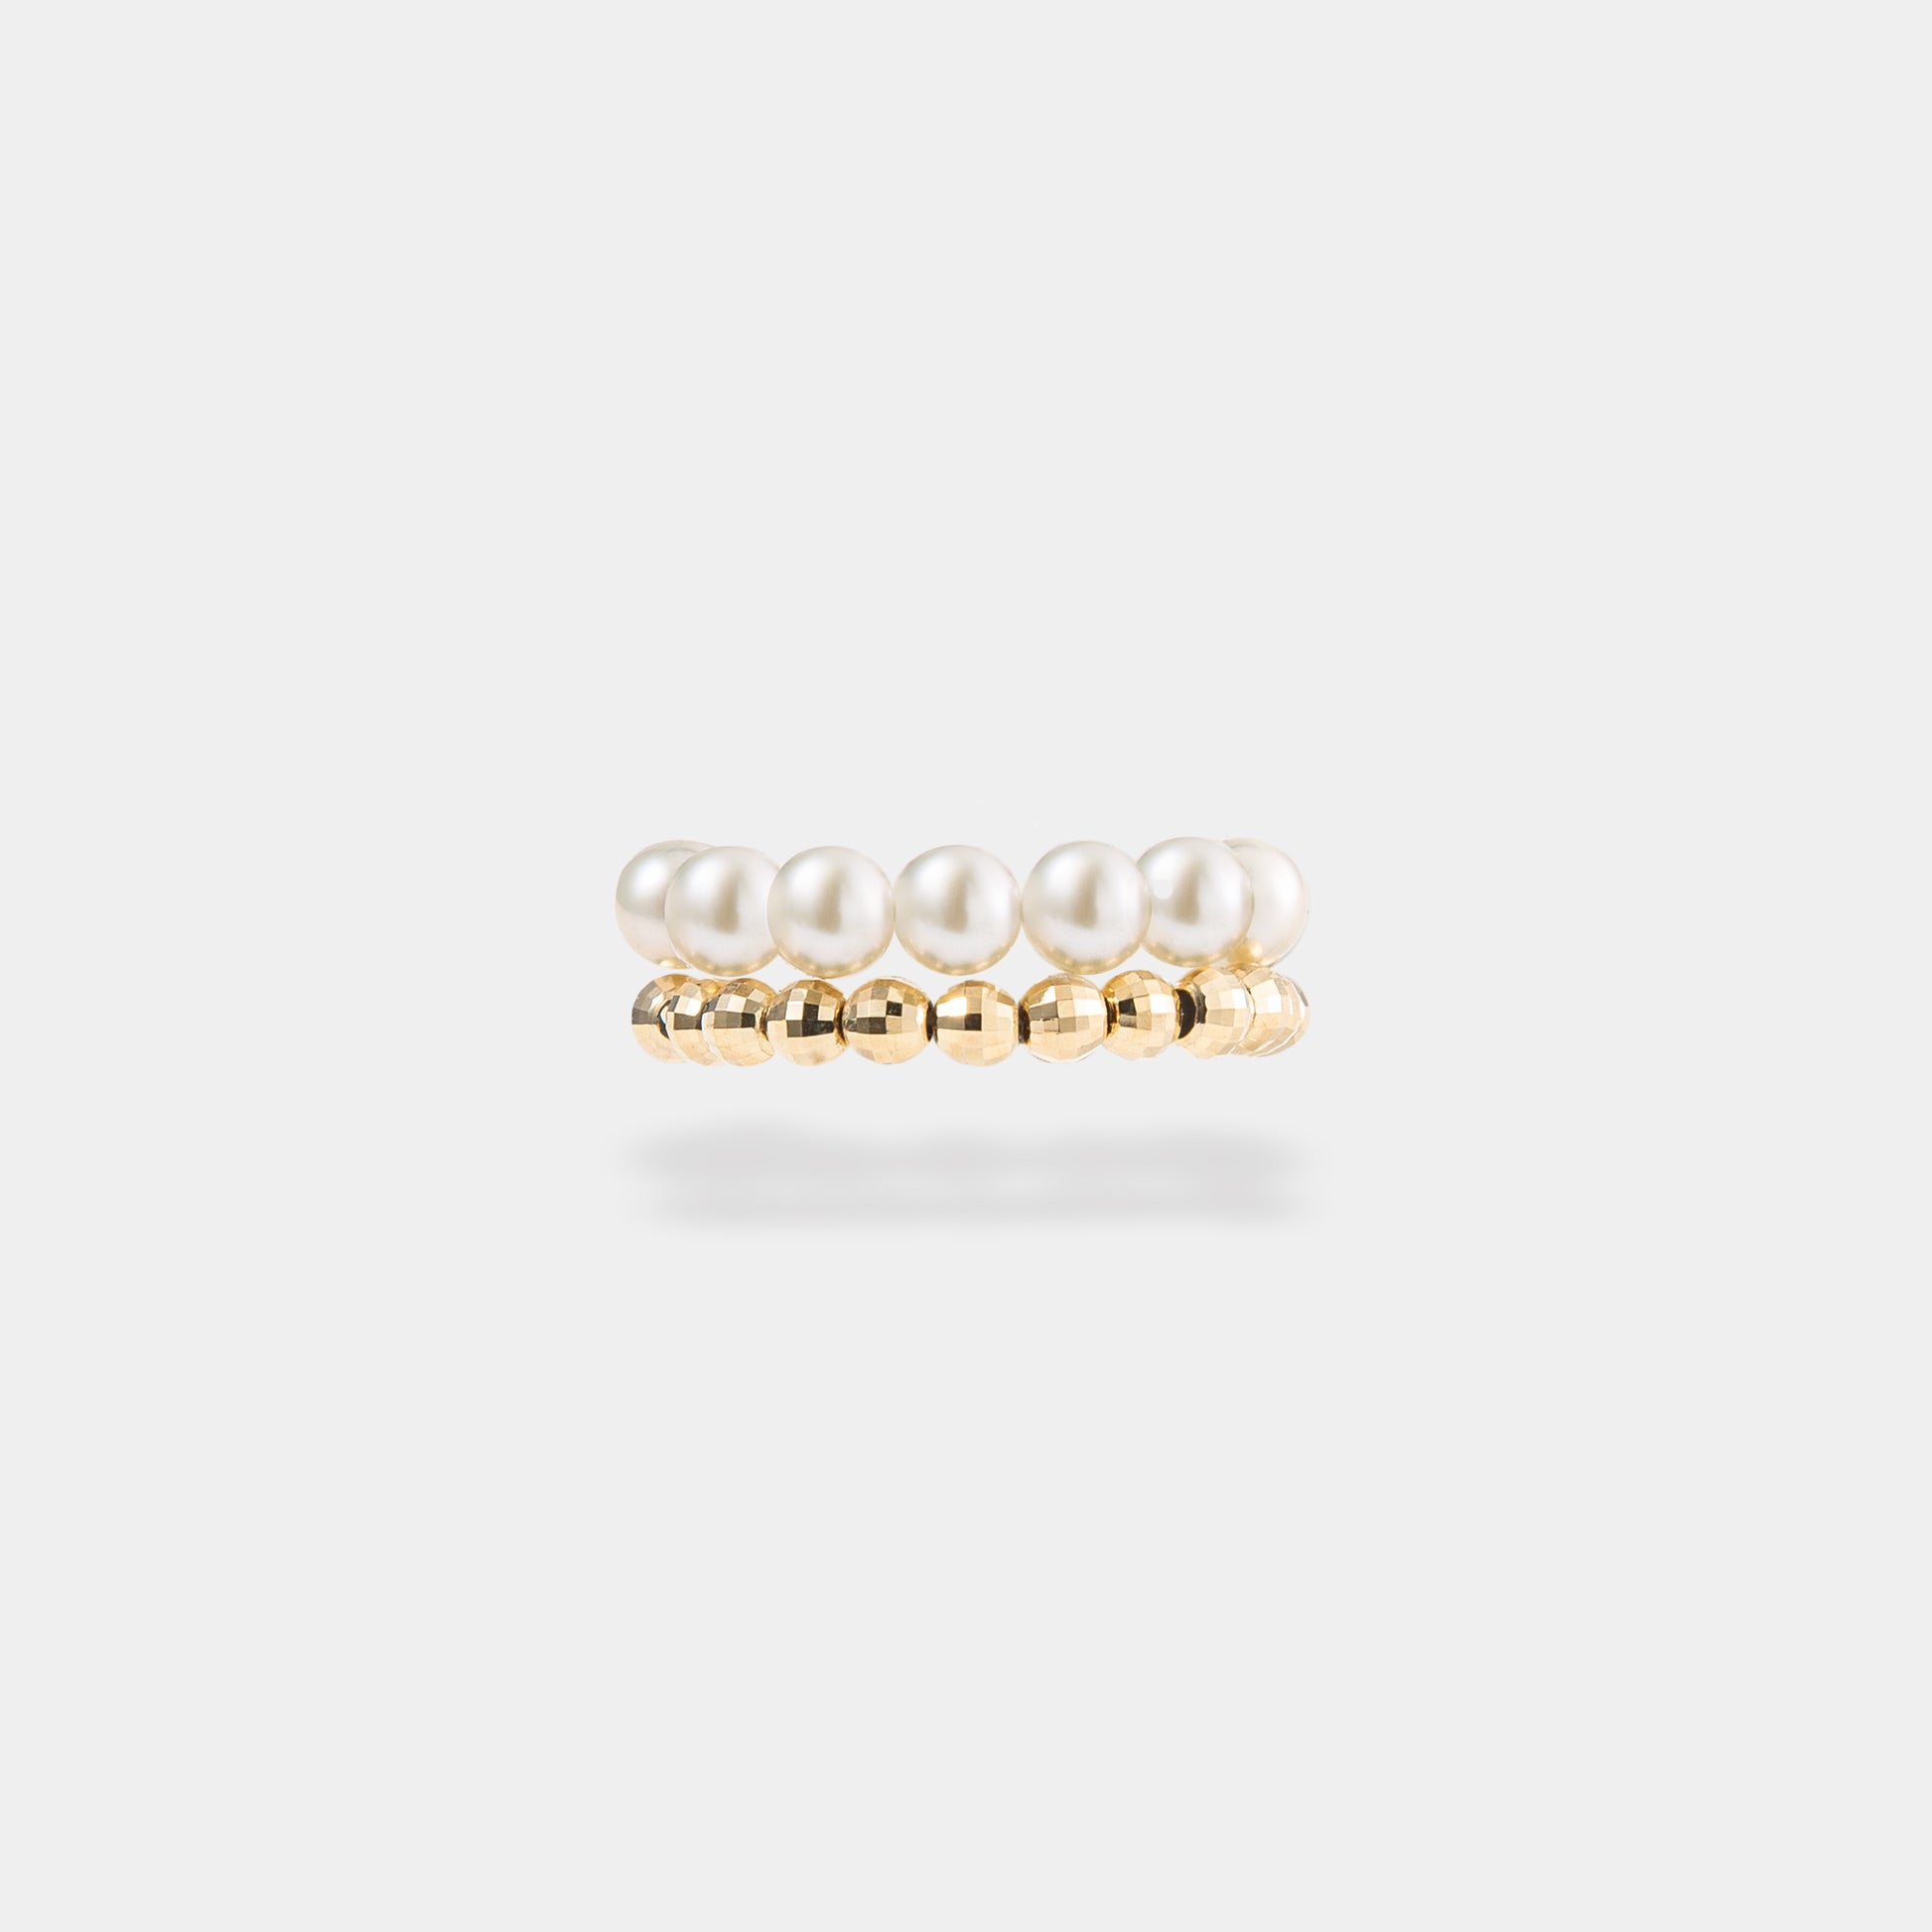 Stunning spiral pearl x gold ring, a luxurious accessory that exudes timeless beauty and elegance.